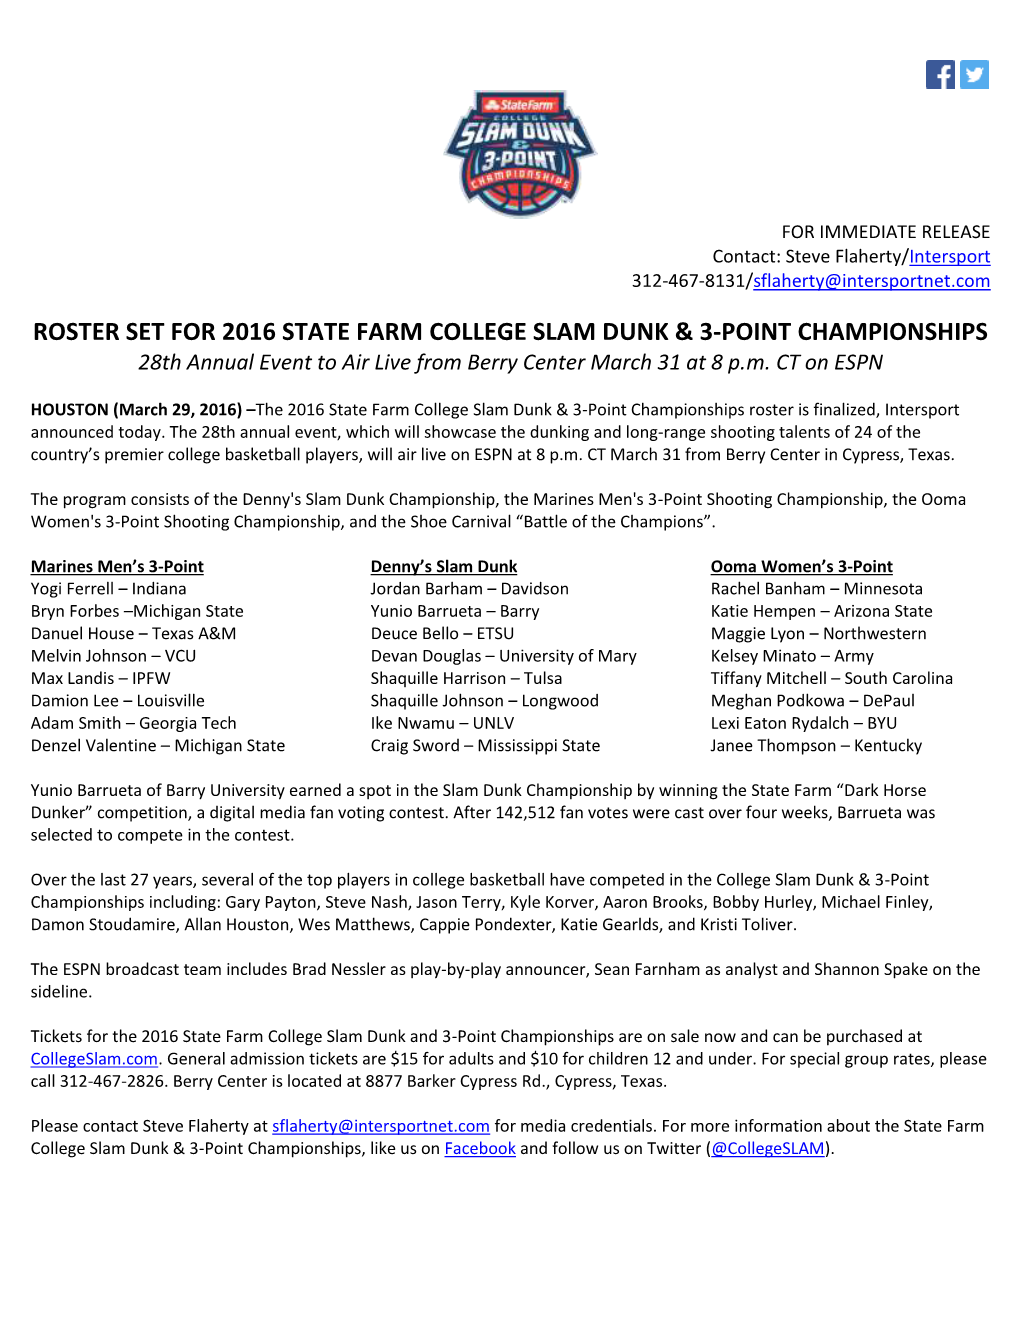 Roster Set for 2016 State Farm College Slam Dunk & 3